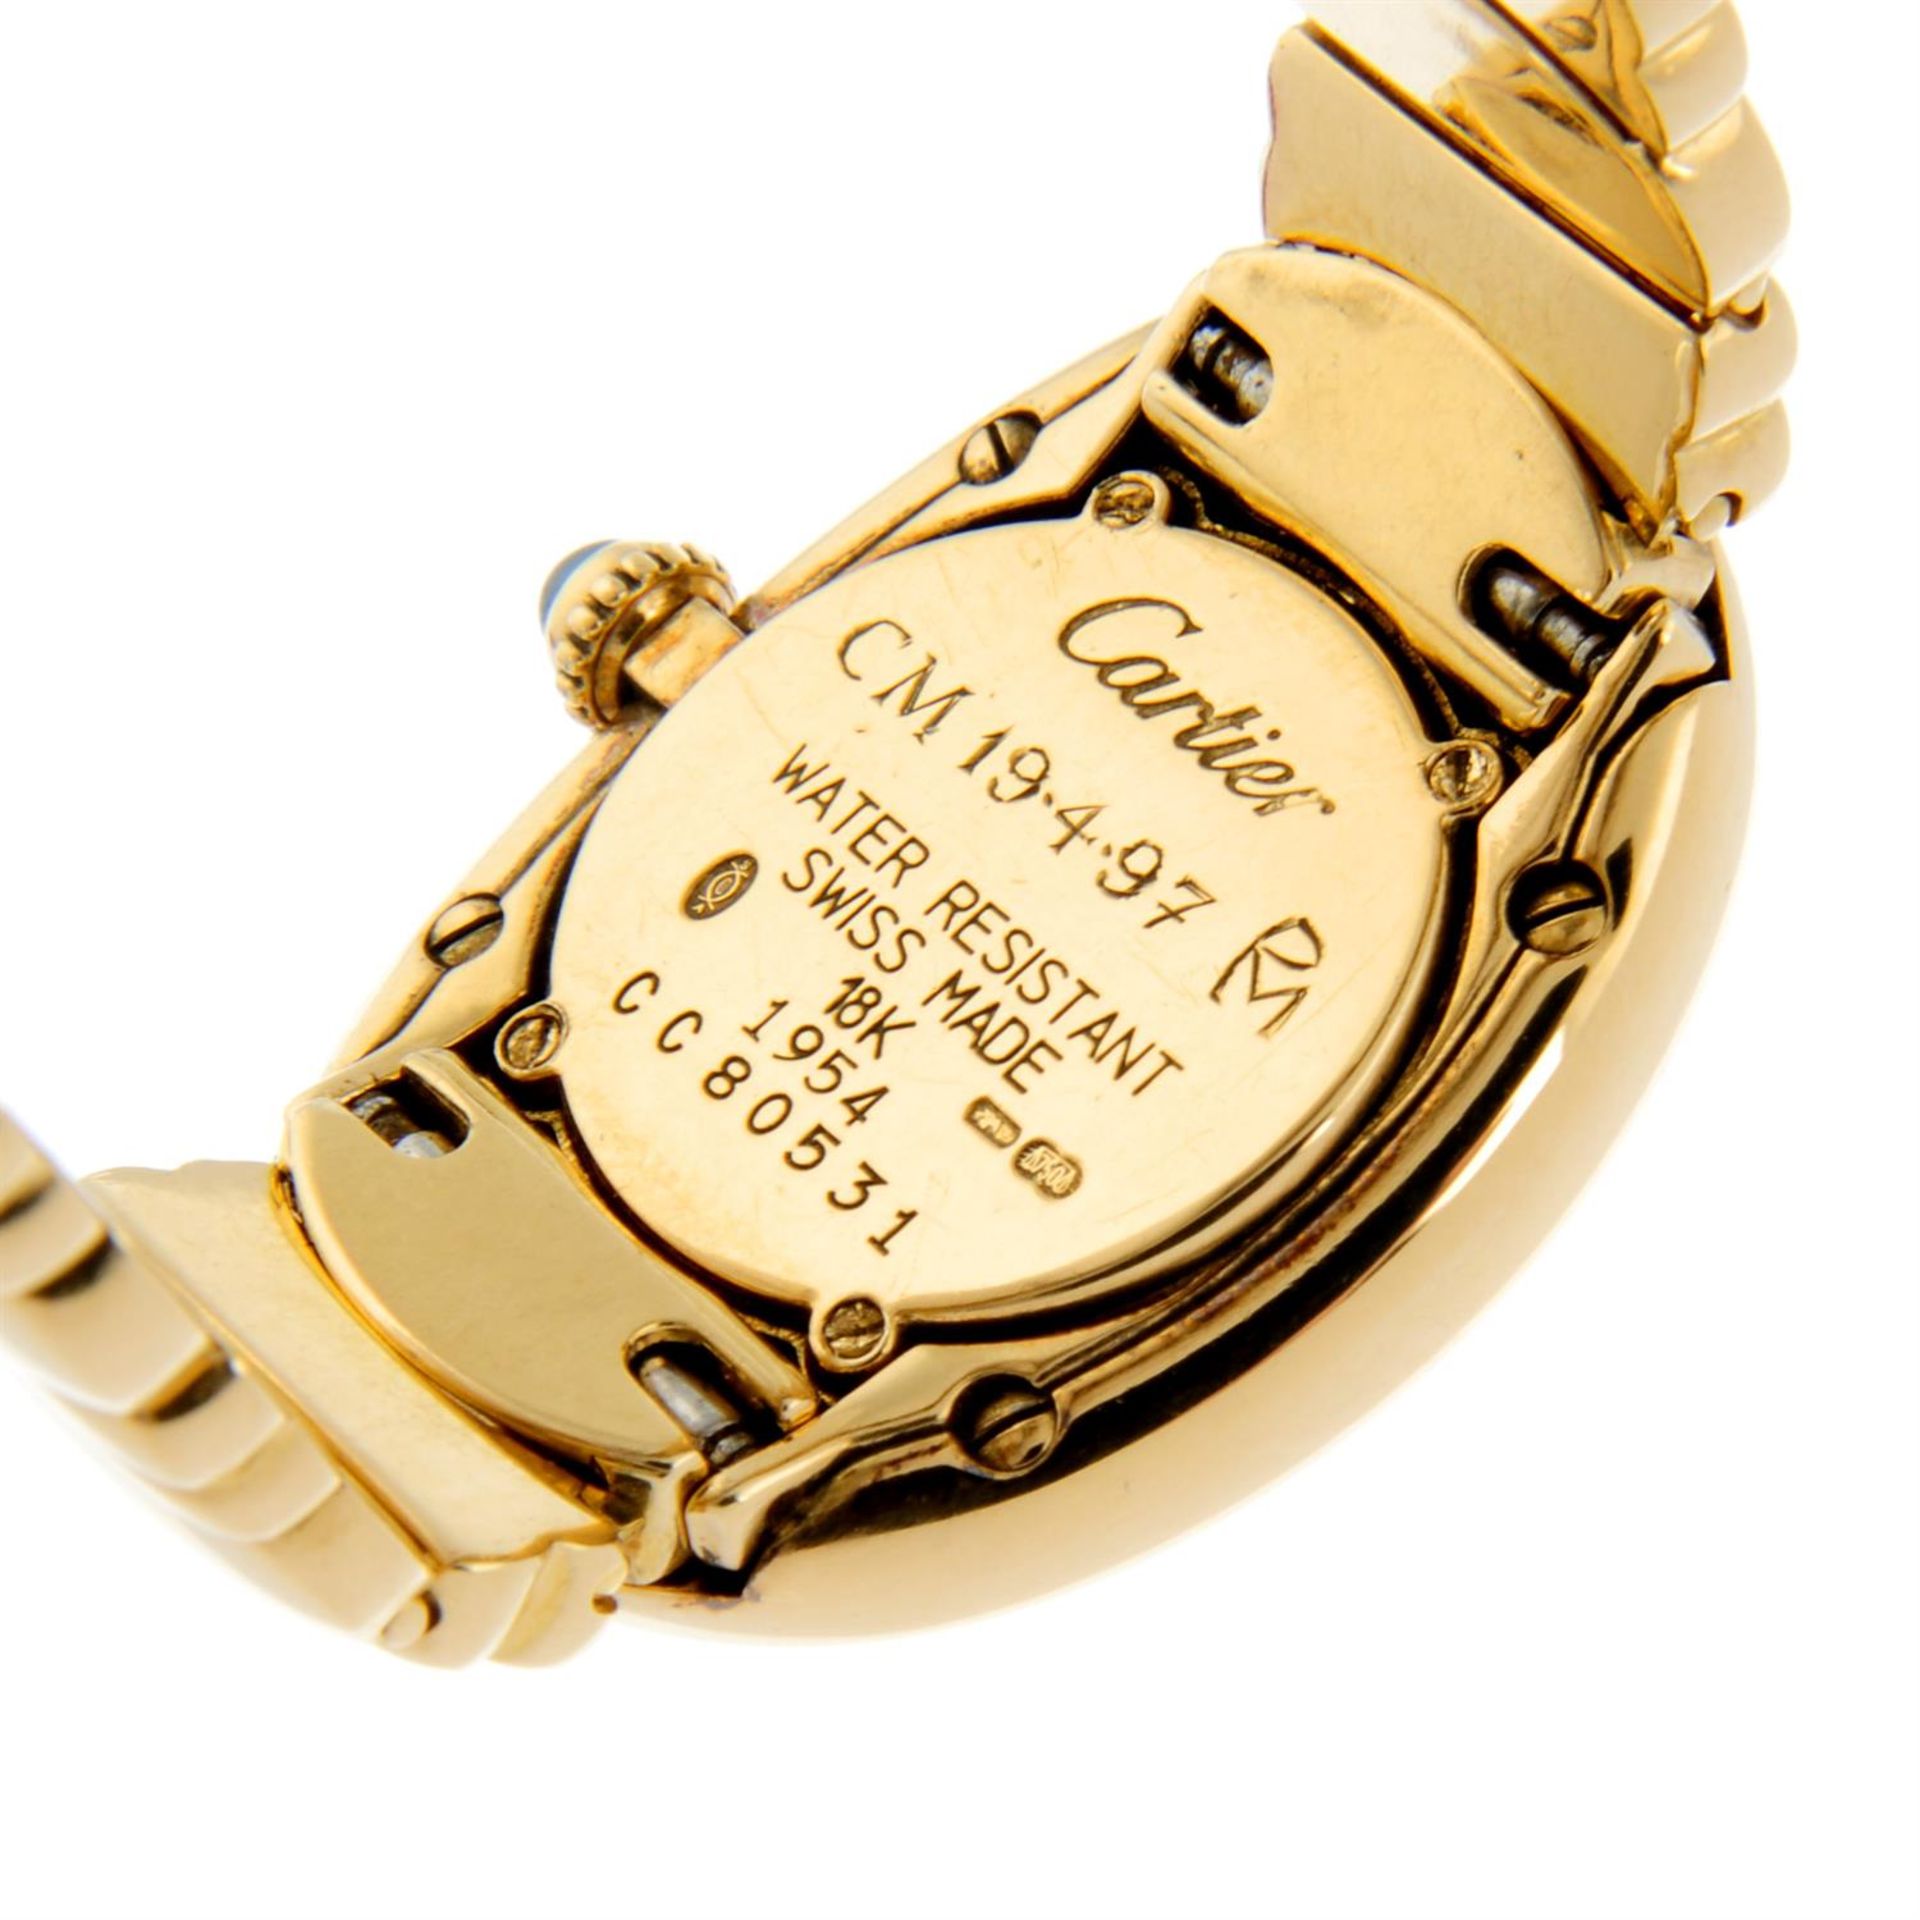 CARTIER - an 18ct yellow gold Baignoire bracelet watch, 22mmx30mm. - Image 5 of 6